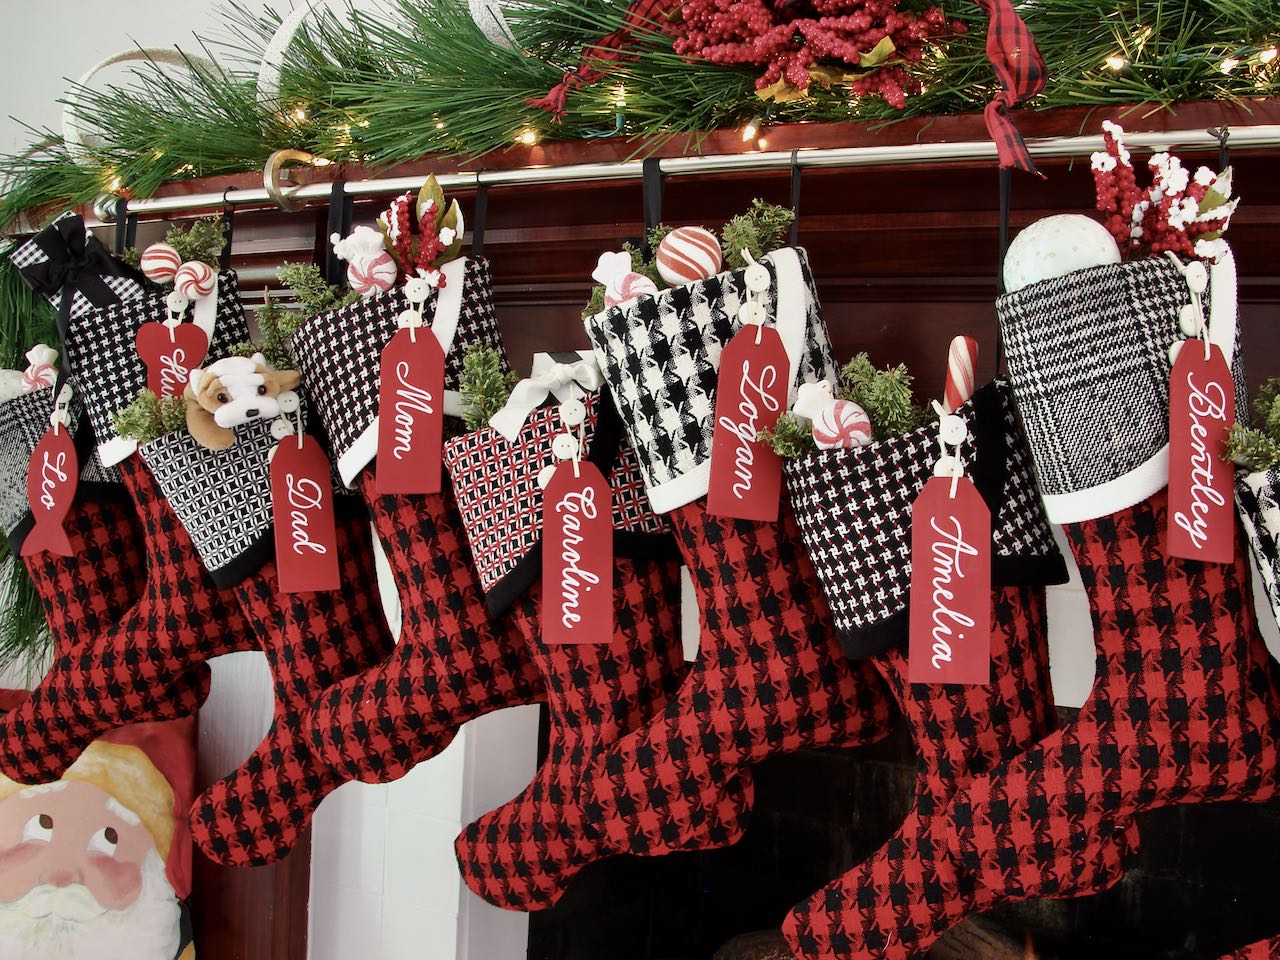 8 coordinating yet unique Christmas stockings are hanging from a mantel. Large wood name tags hang from the top of three buttons on each cuff